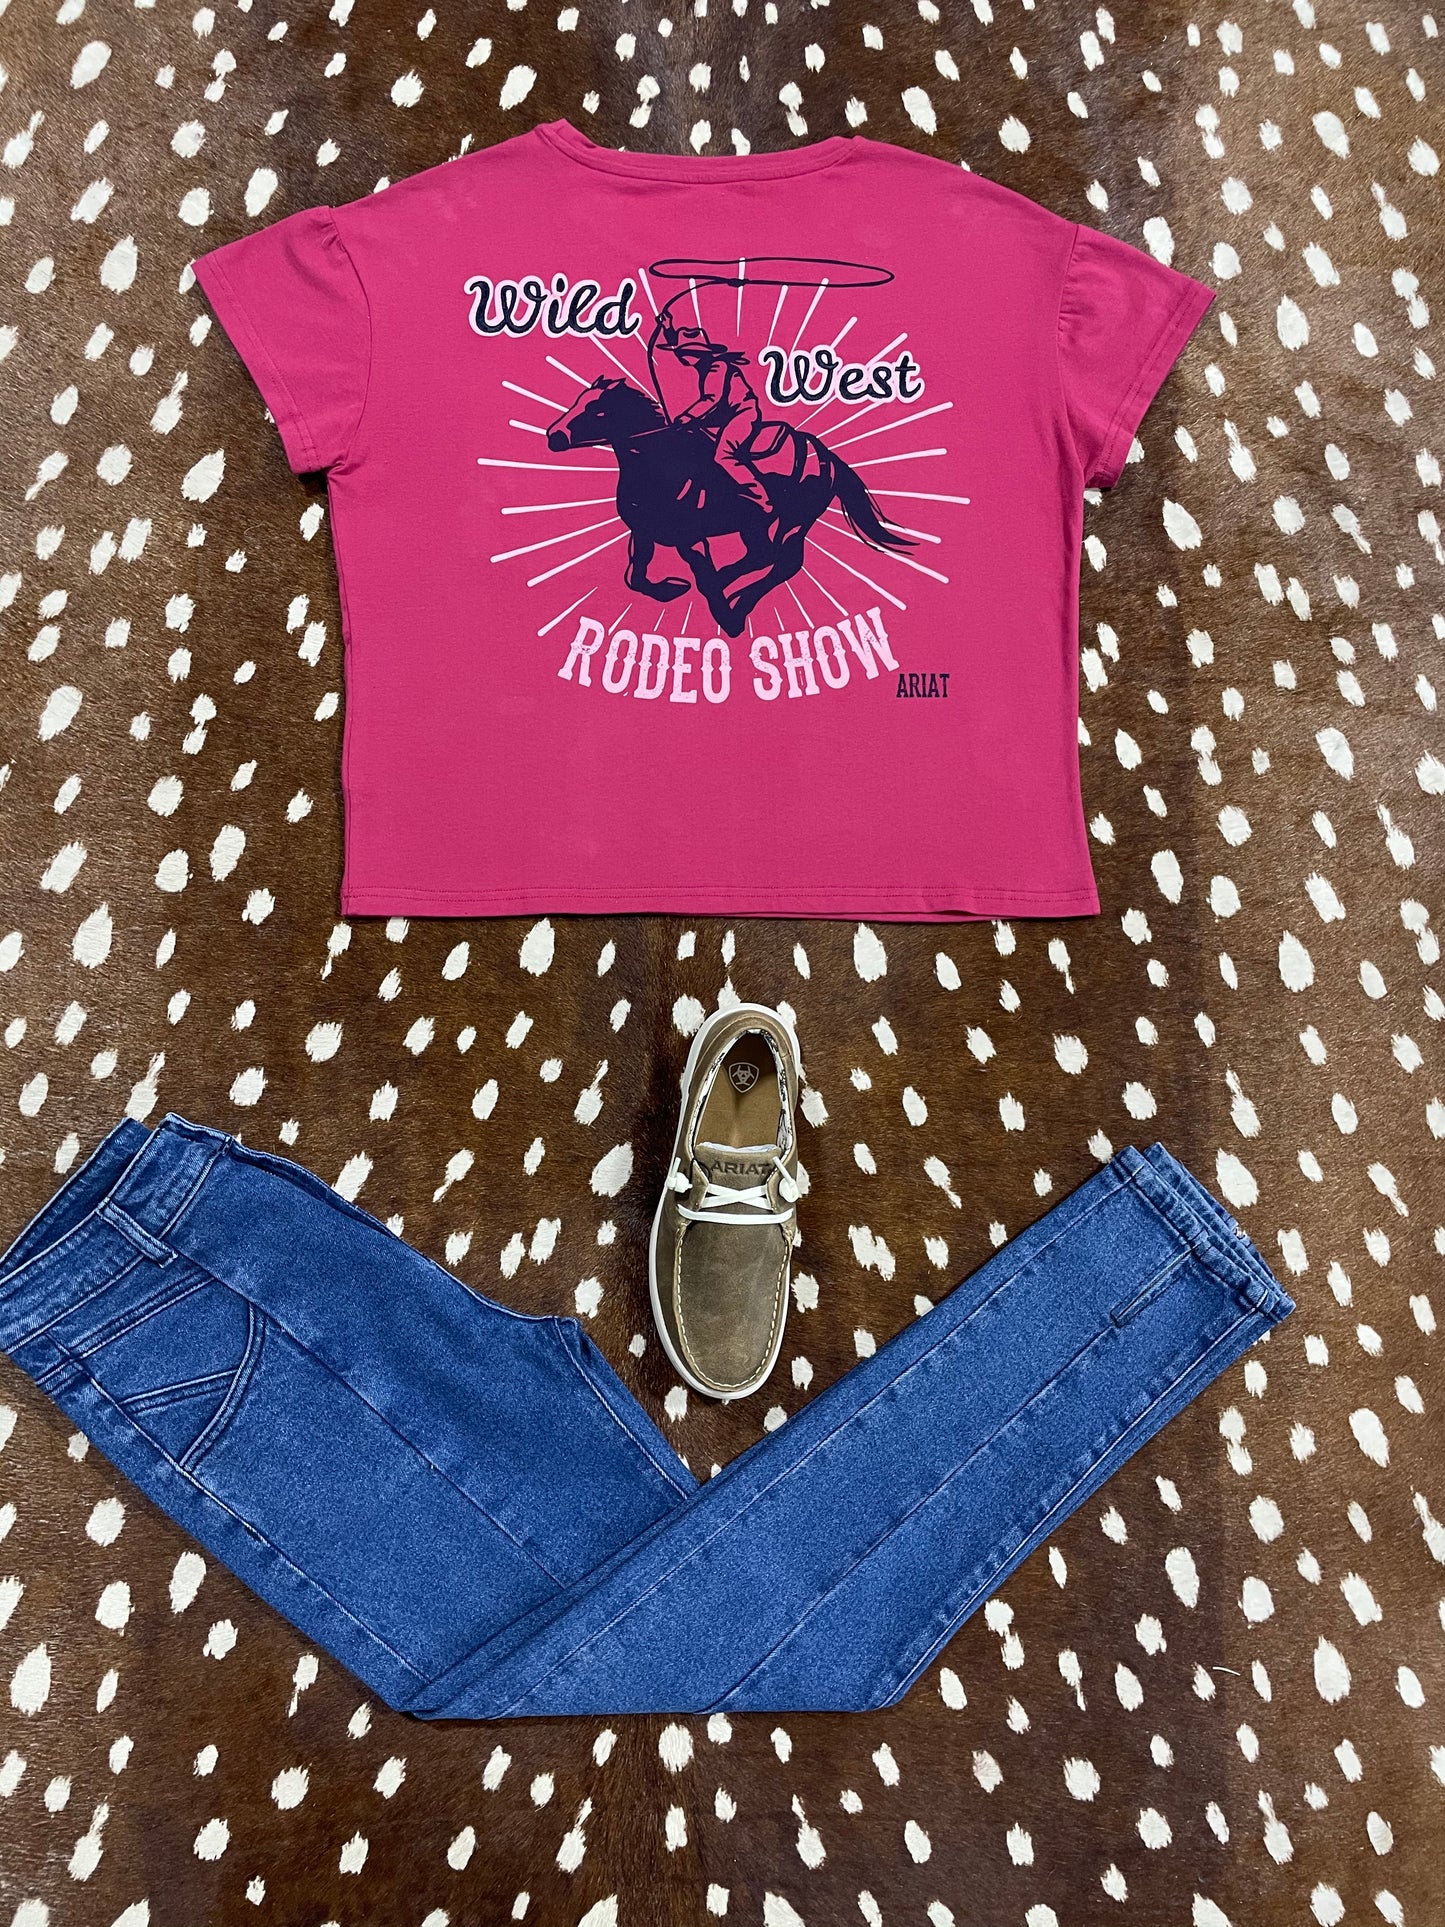 Wild West Rodeo Show Cropped Tee